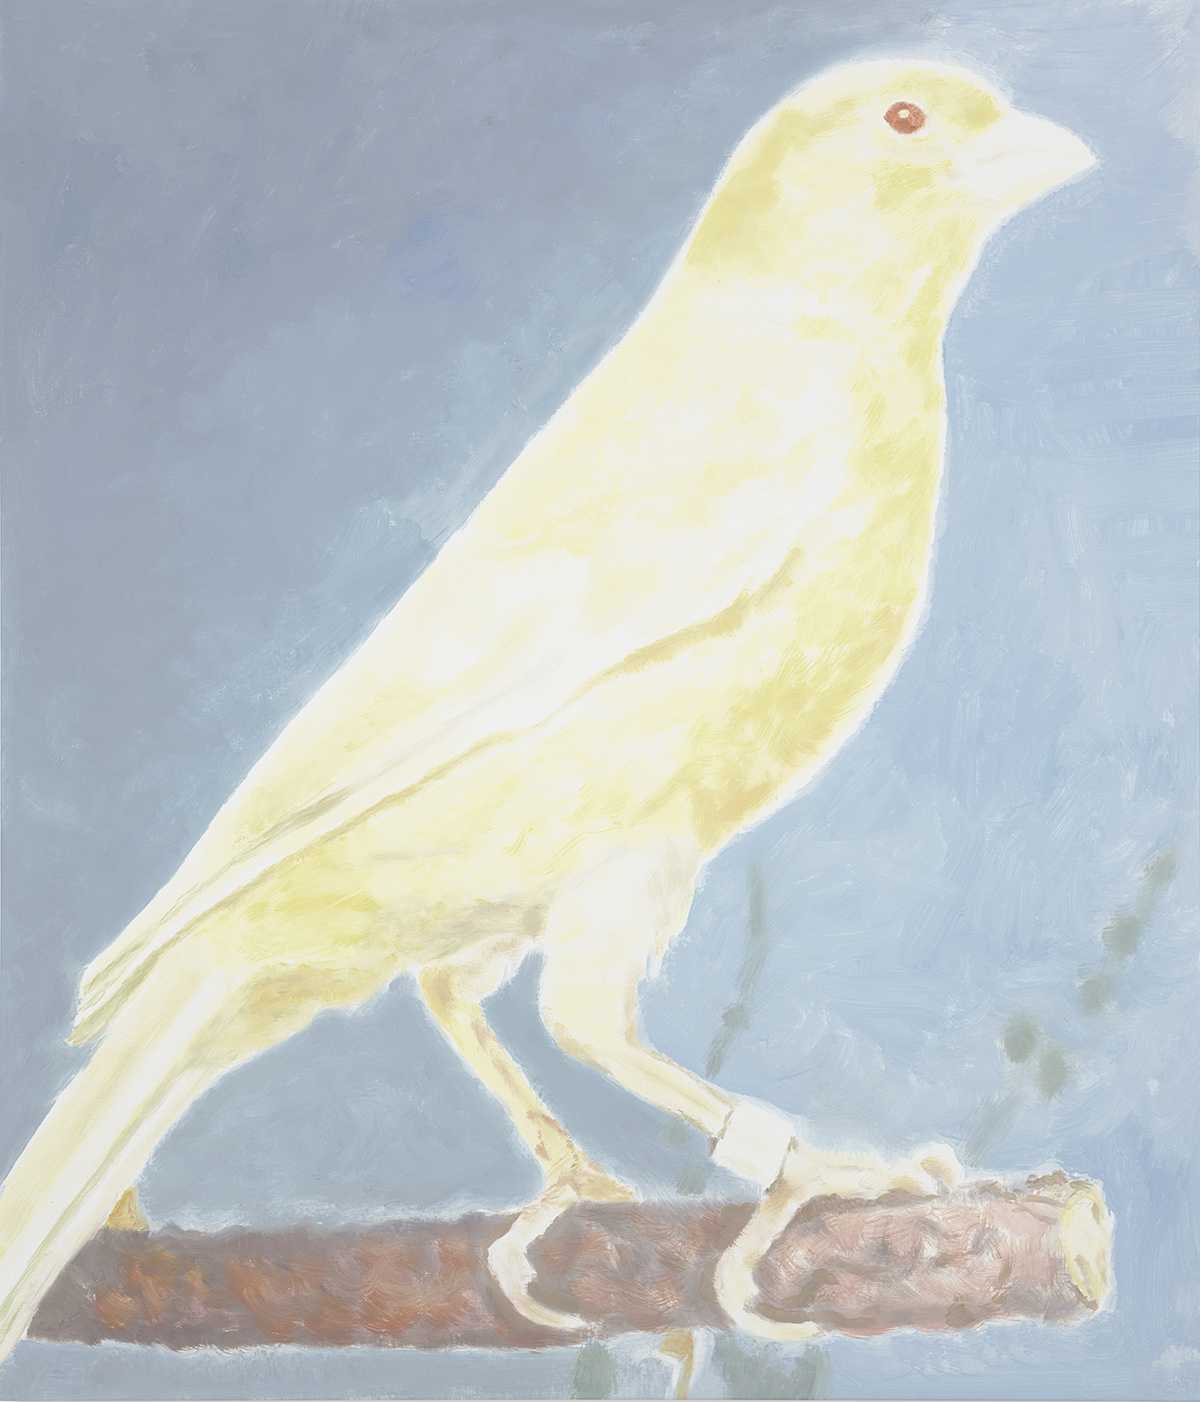 Painting of a bird sitting on a branch against a blue background